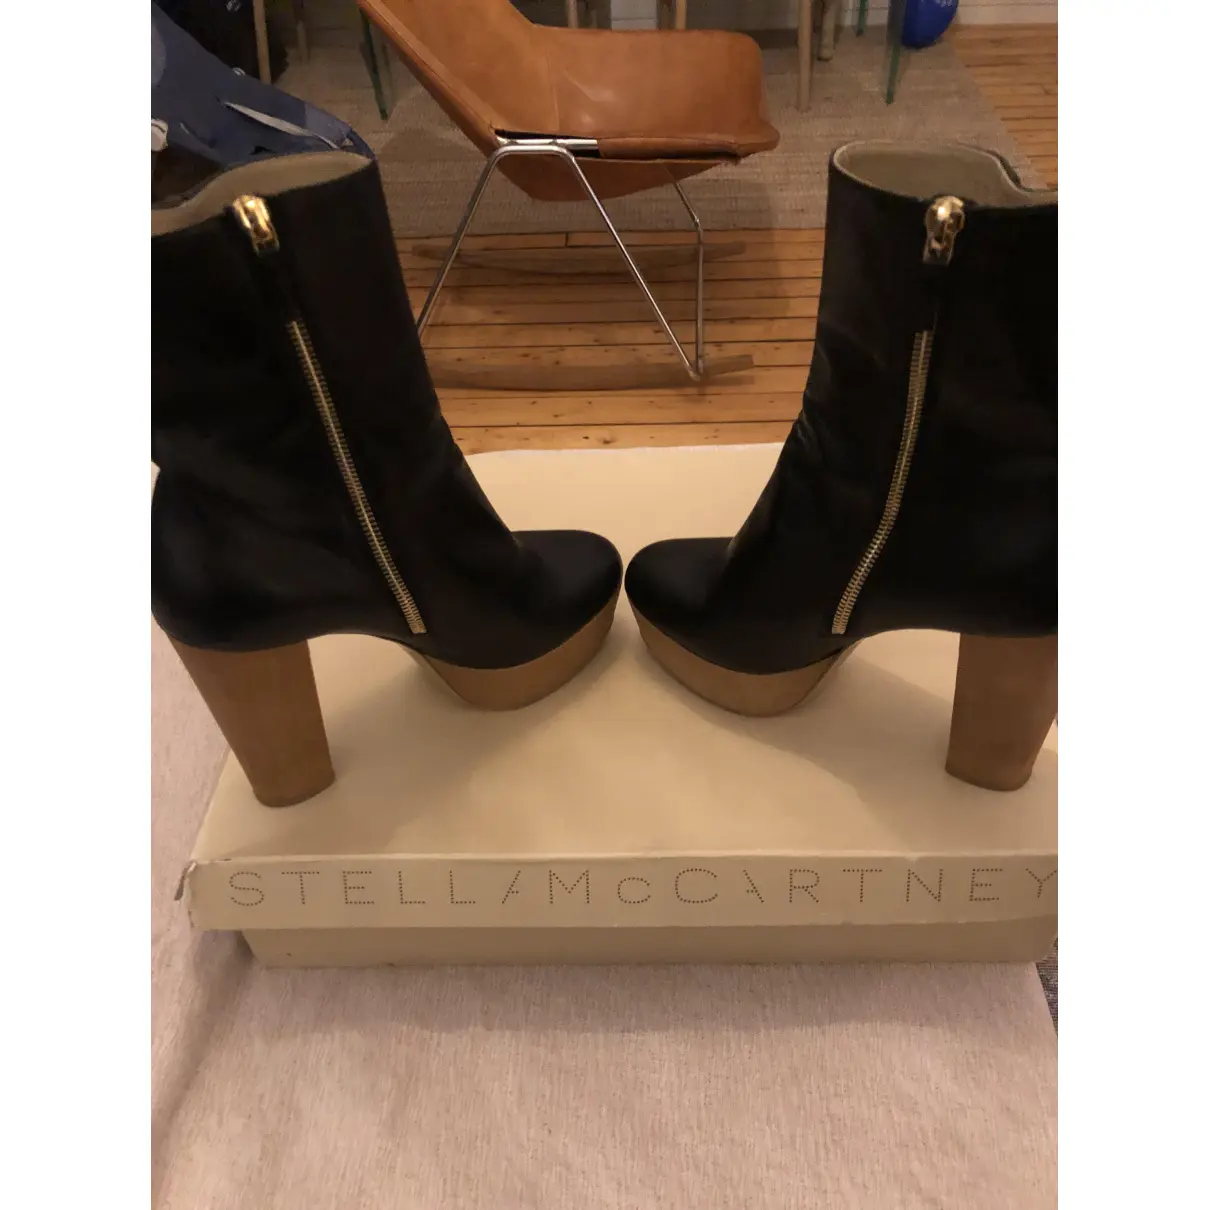 Buy Stella McCartney Cloth ankle boots online